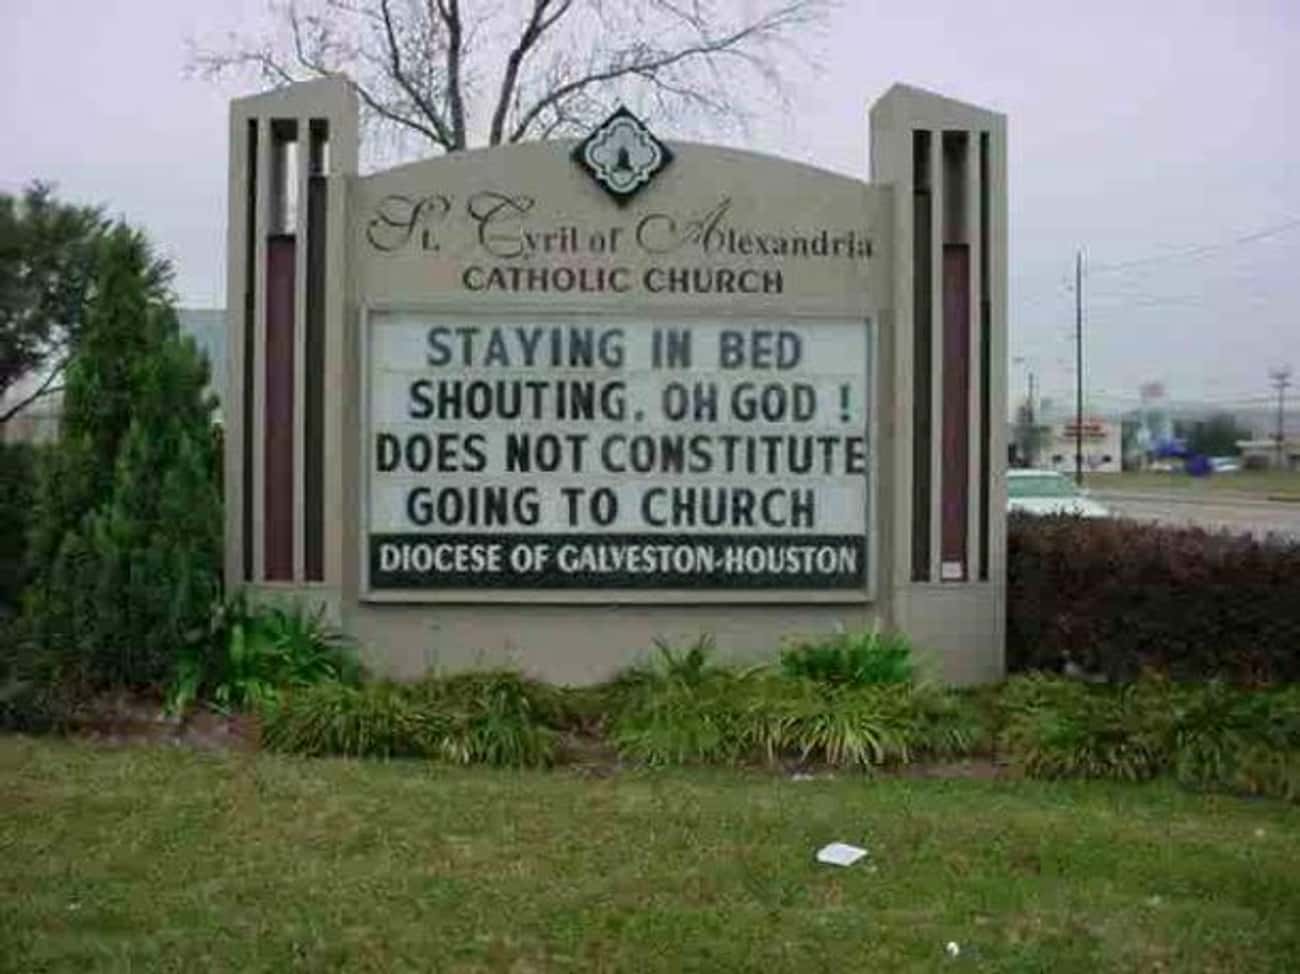 The Church Addresses Tummy Pains... Right?